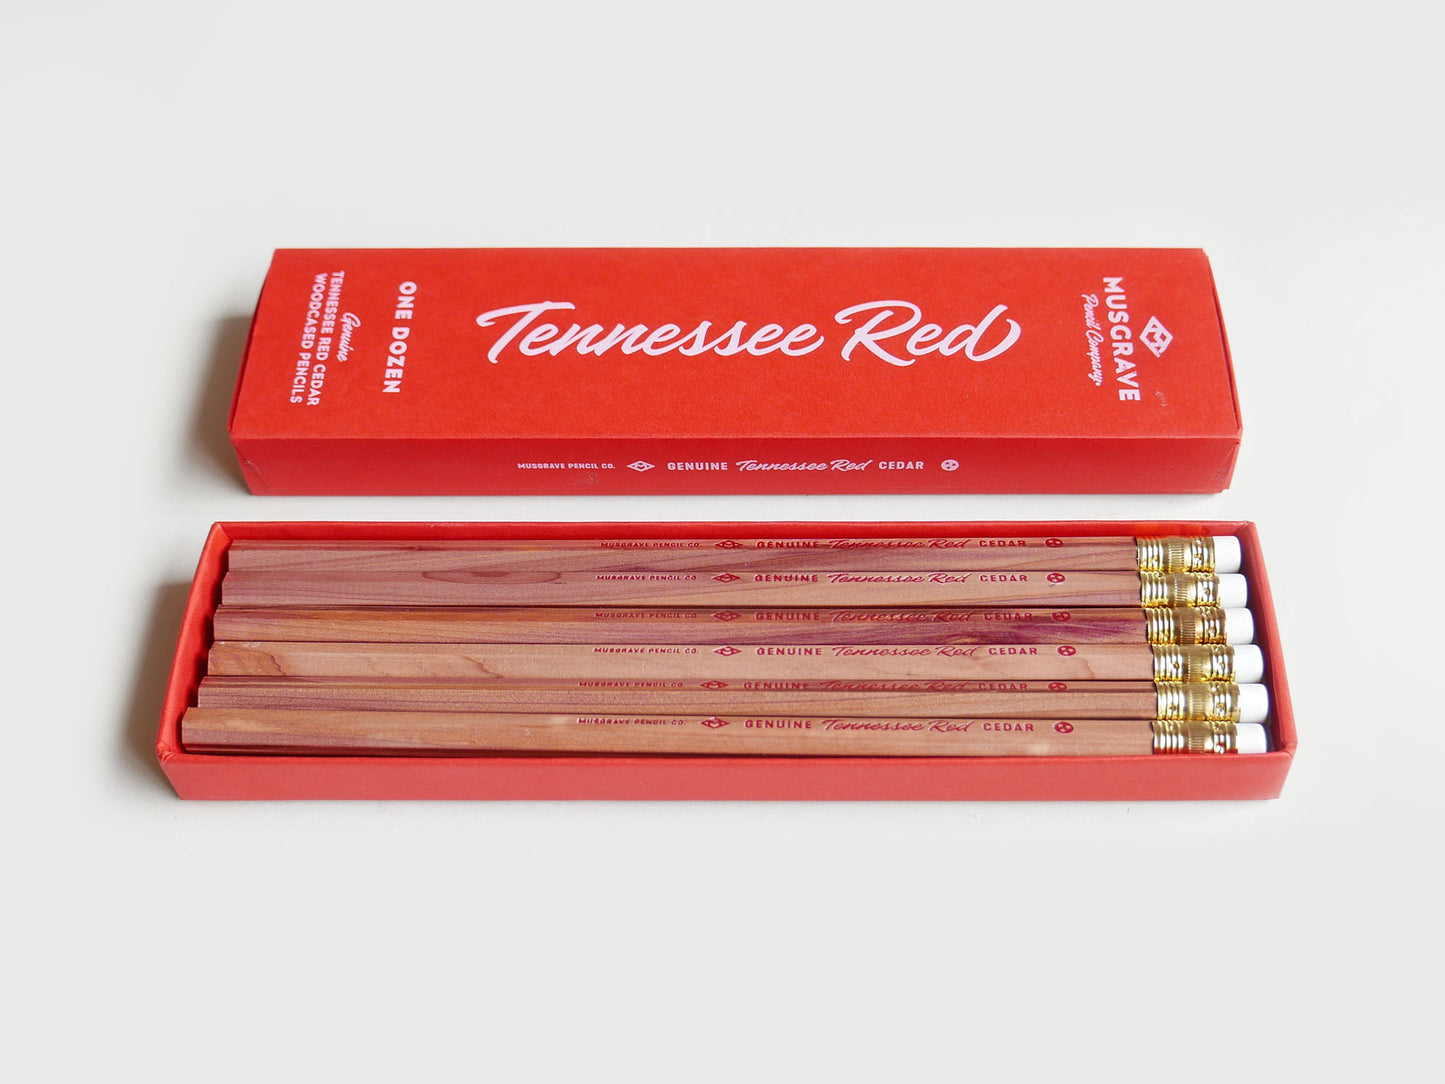 Tennessee Red Pencils